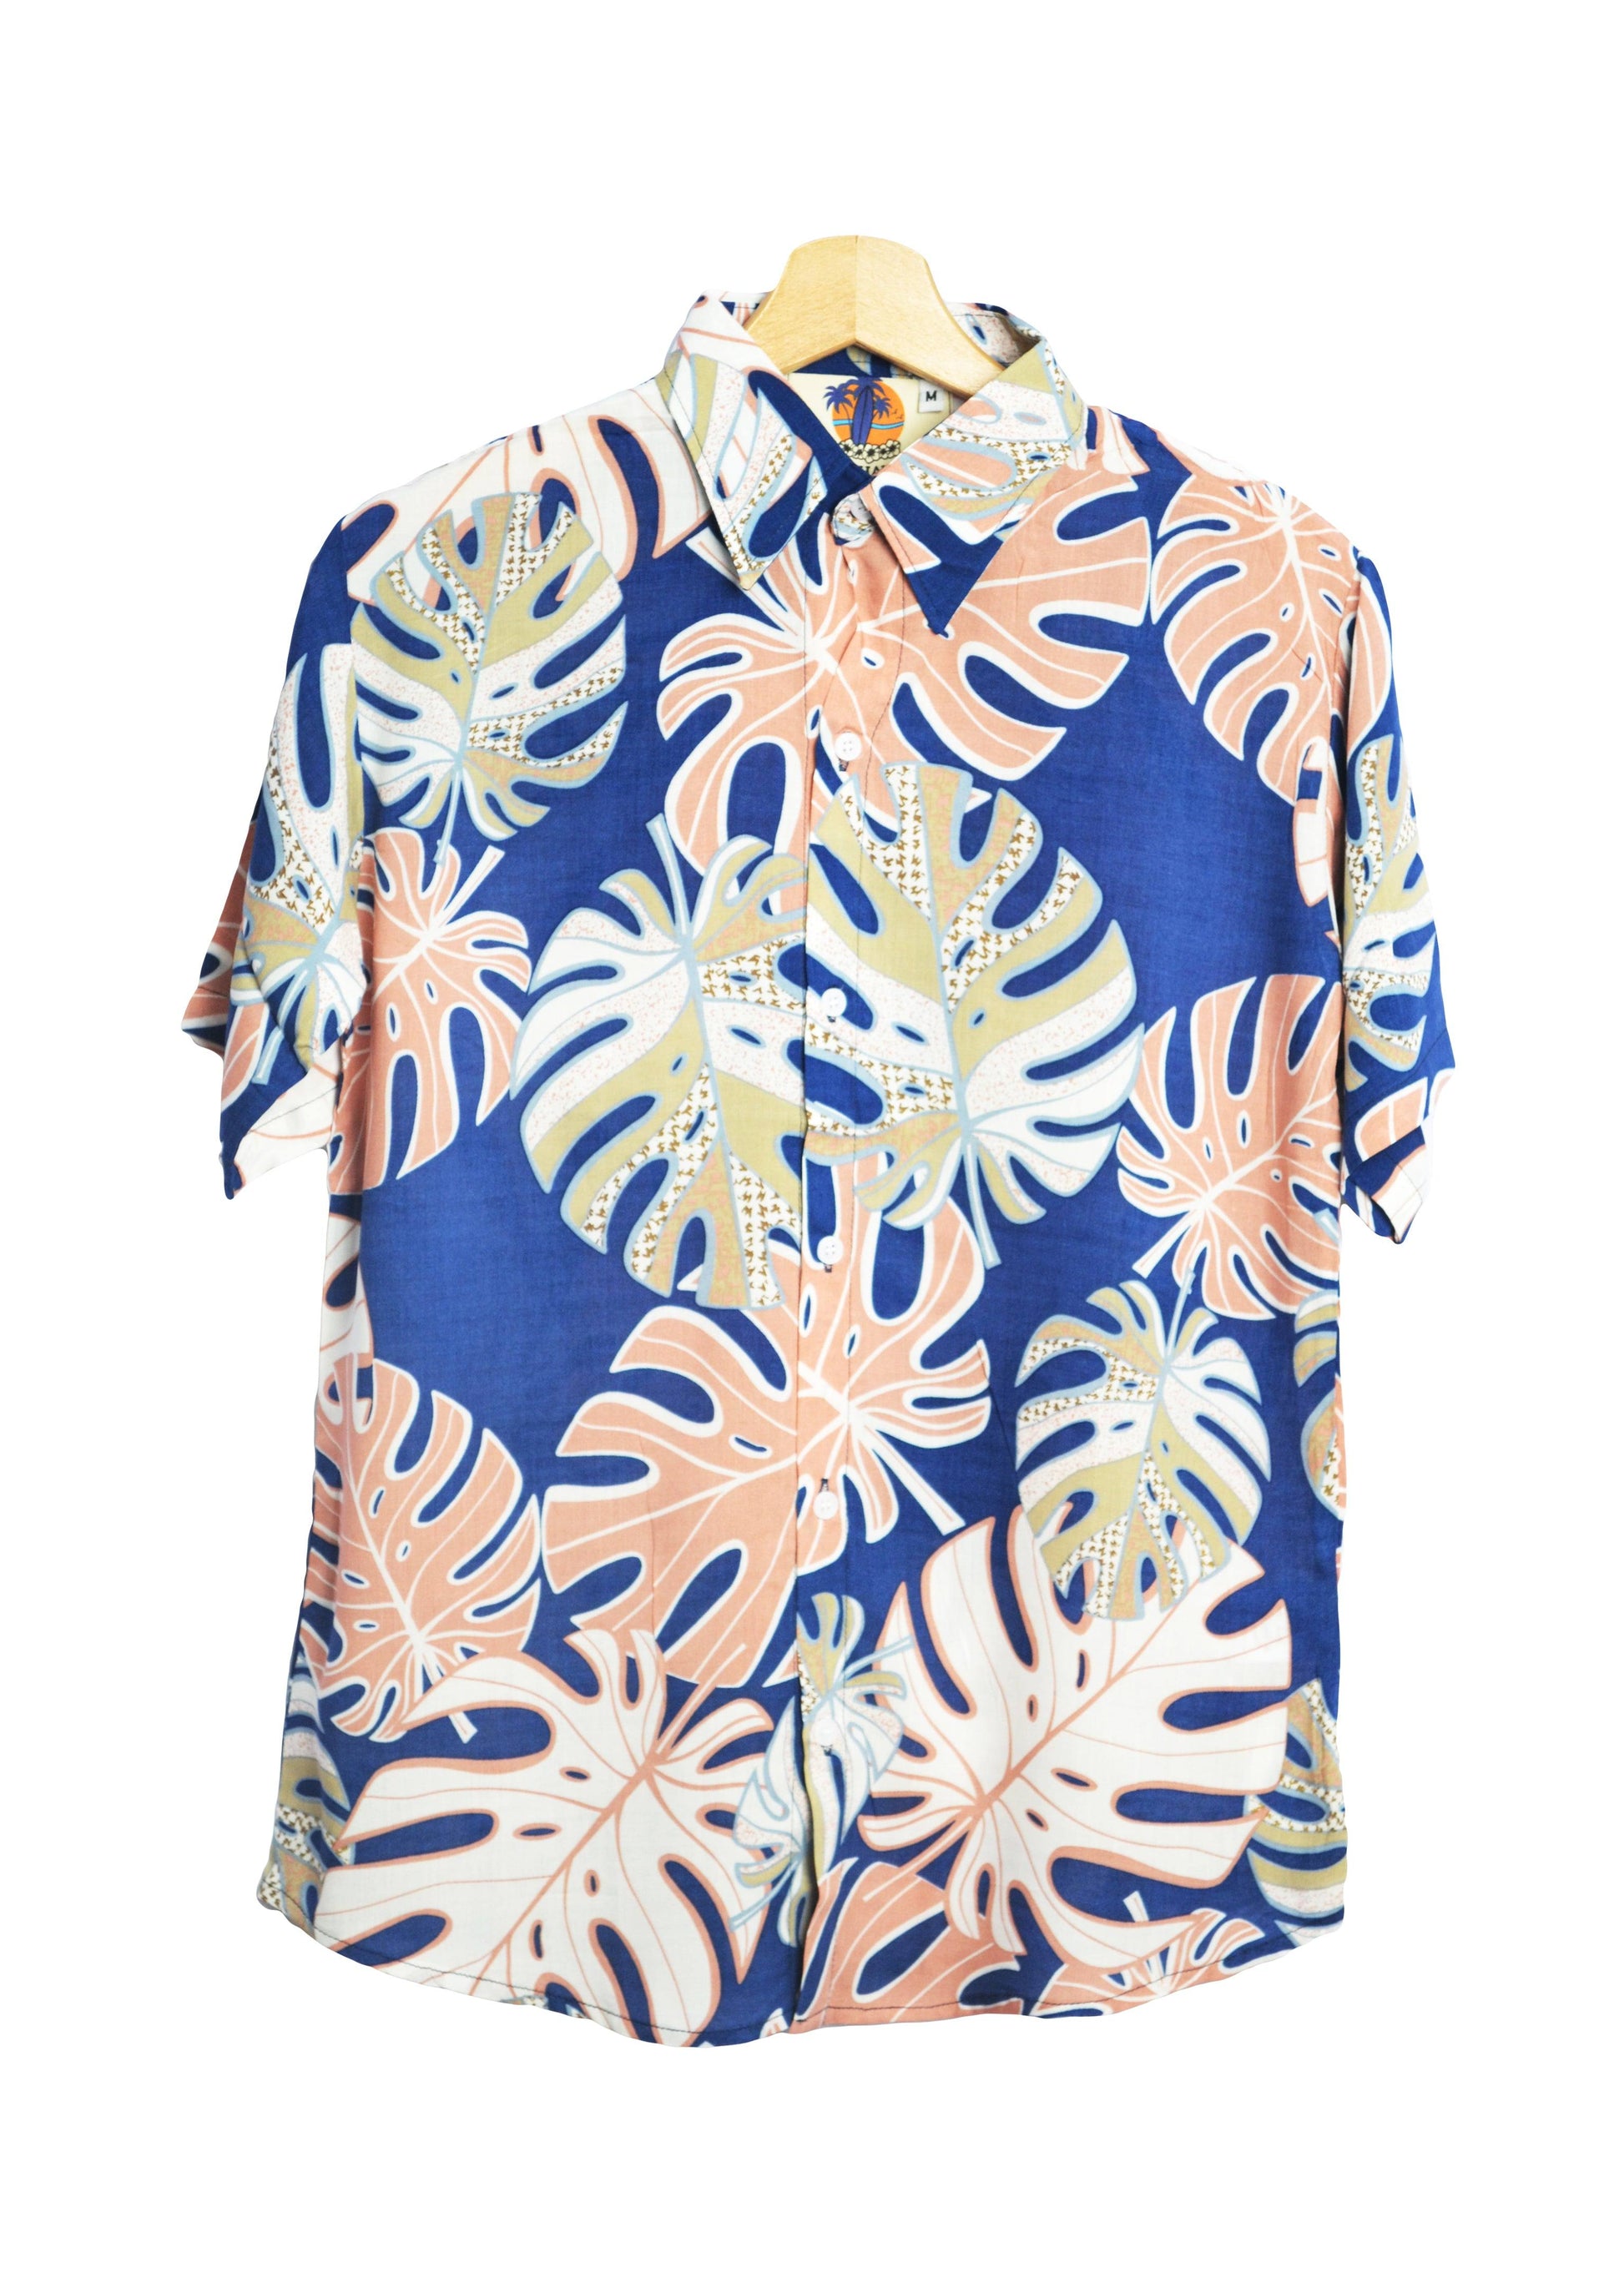 Chemise hawaienne bleue marque up hawaii - GL BOUTIK